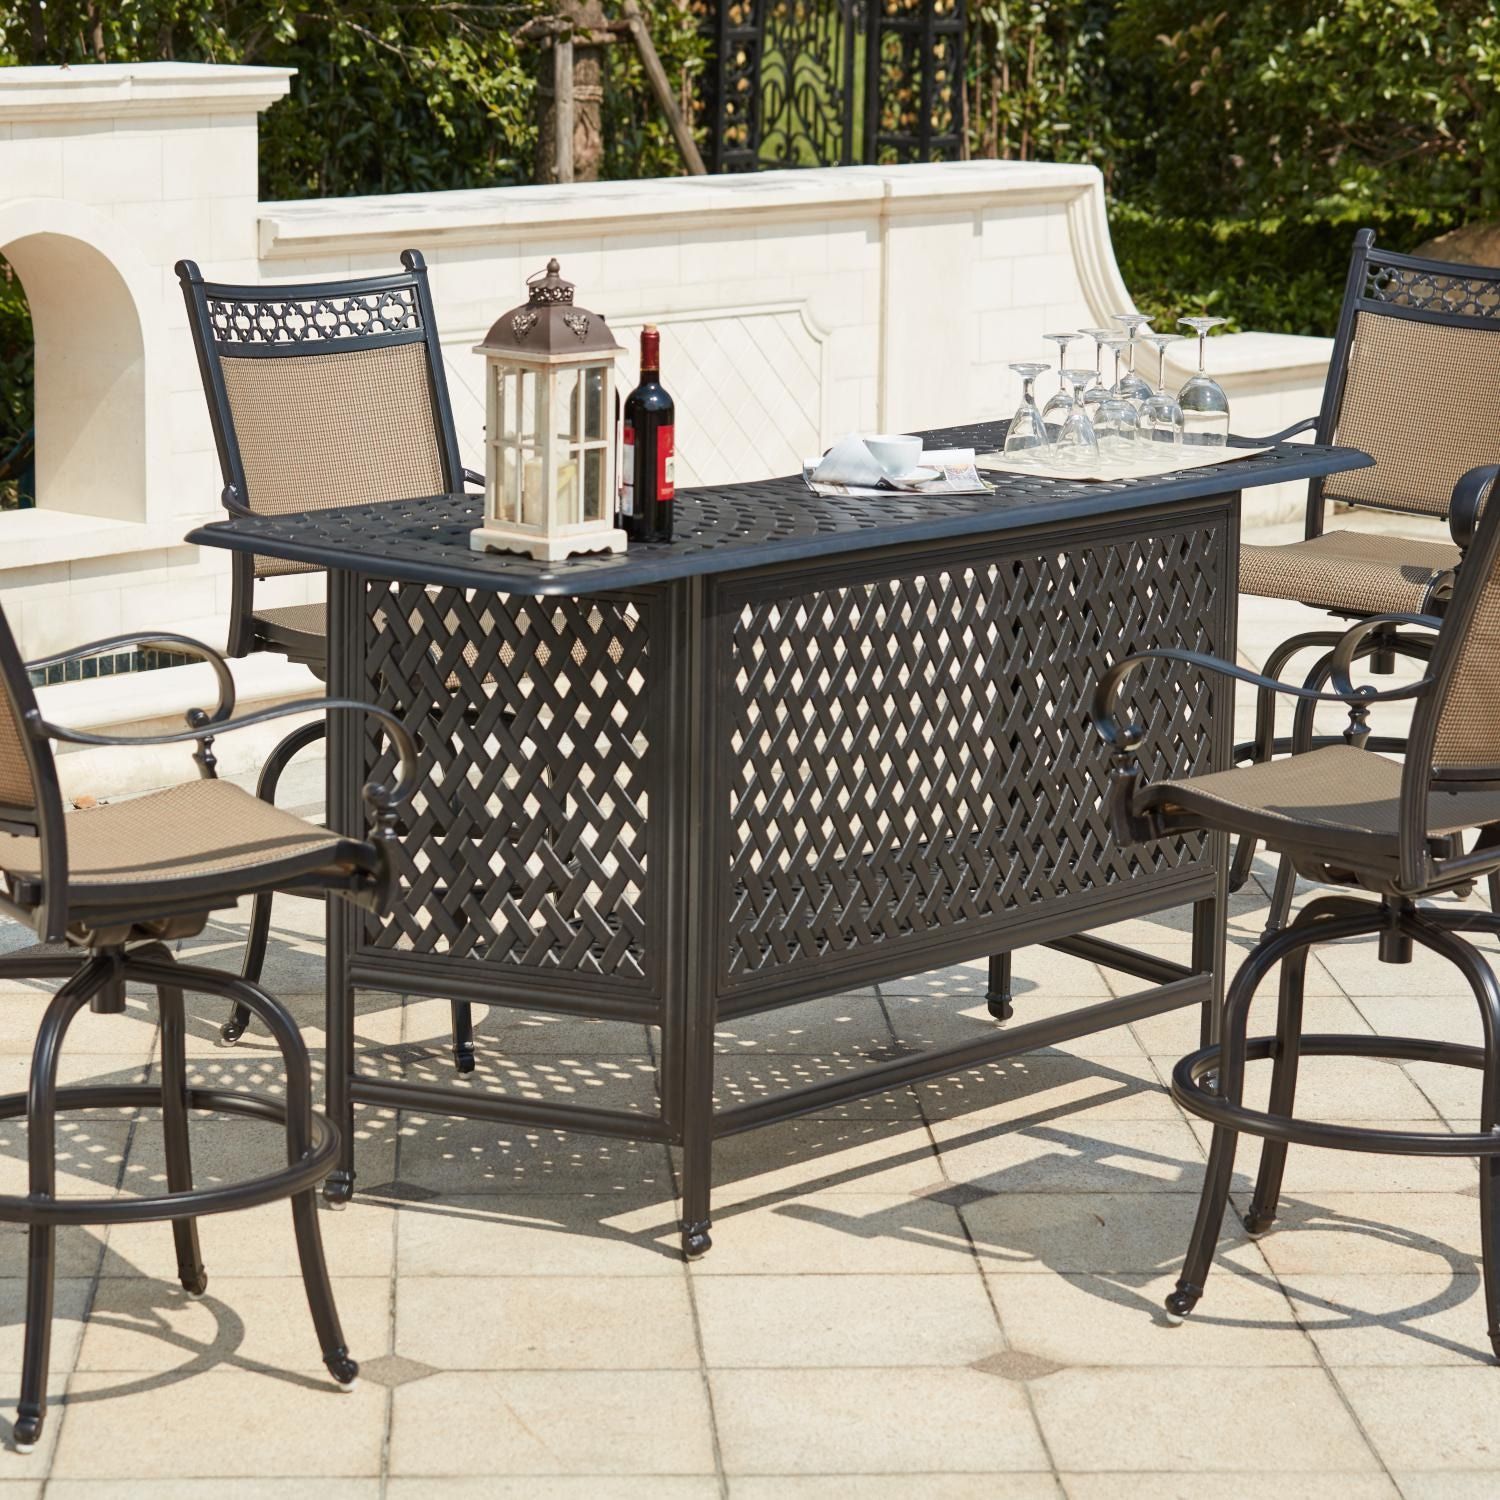 Mountain View 5 Piece Cast Aluminum Sling Patio Party Bar Set W/ Swivel Intended For 5 Piece Outdoor Bar Tables (View 11 of 15)